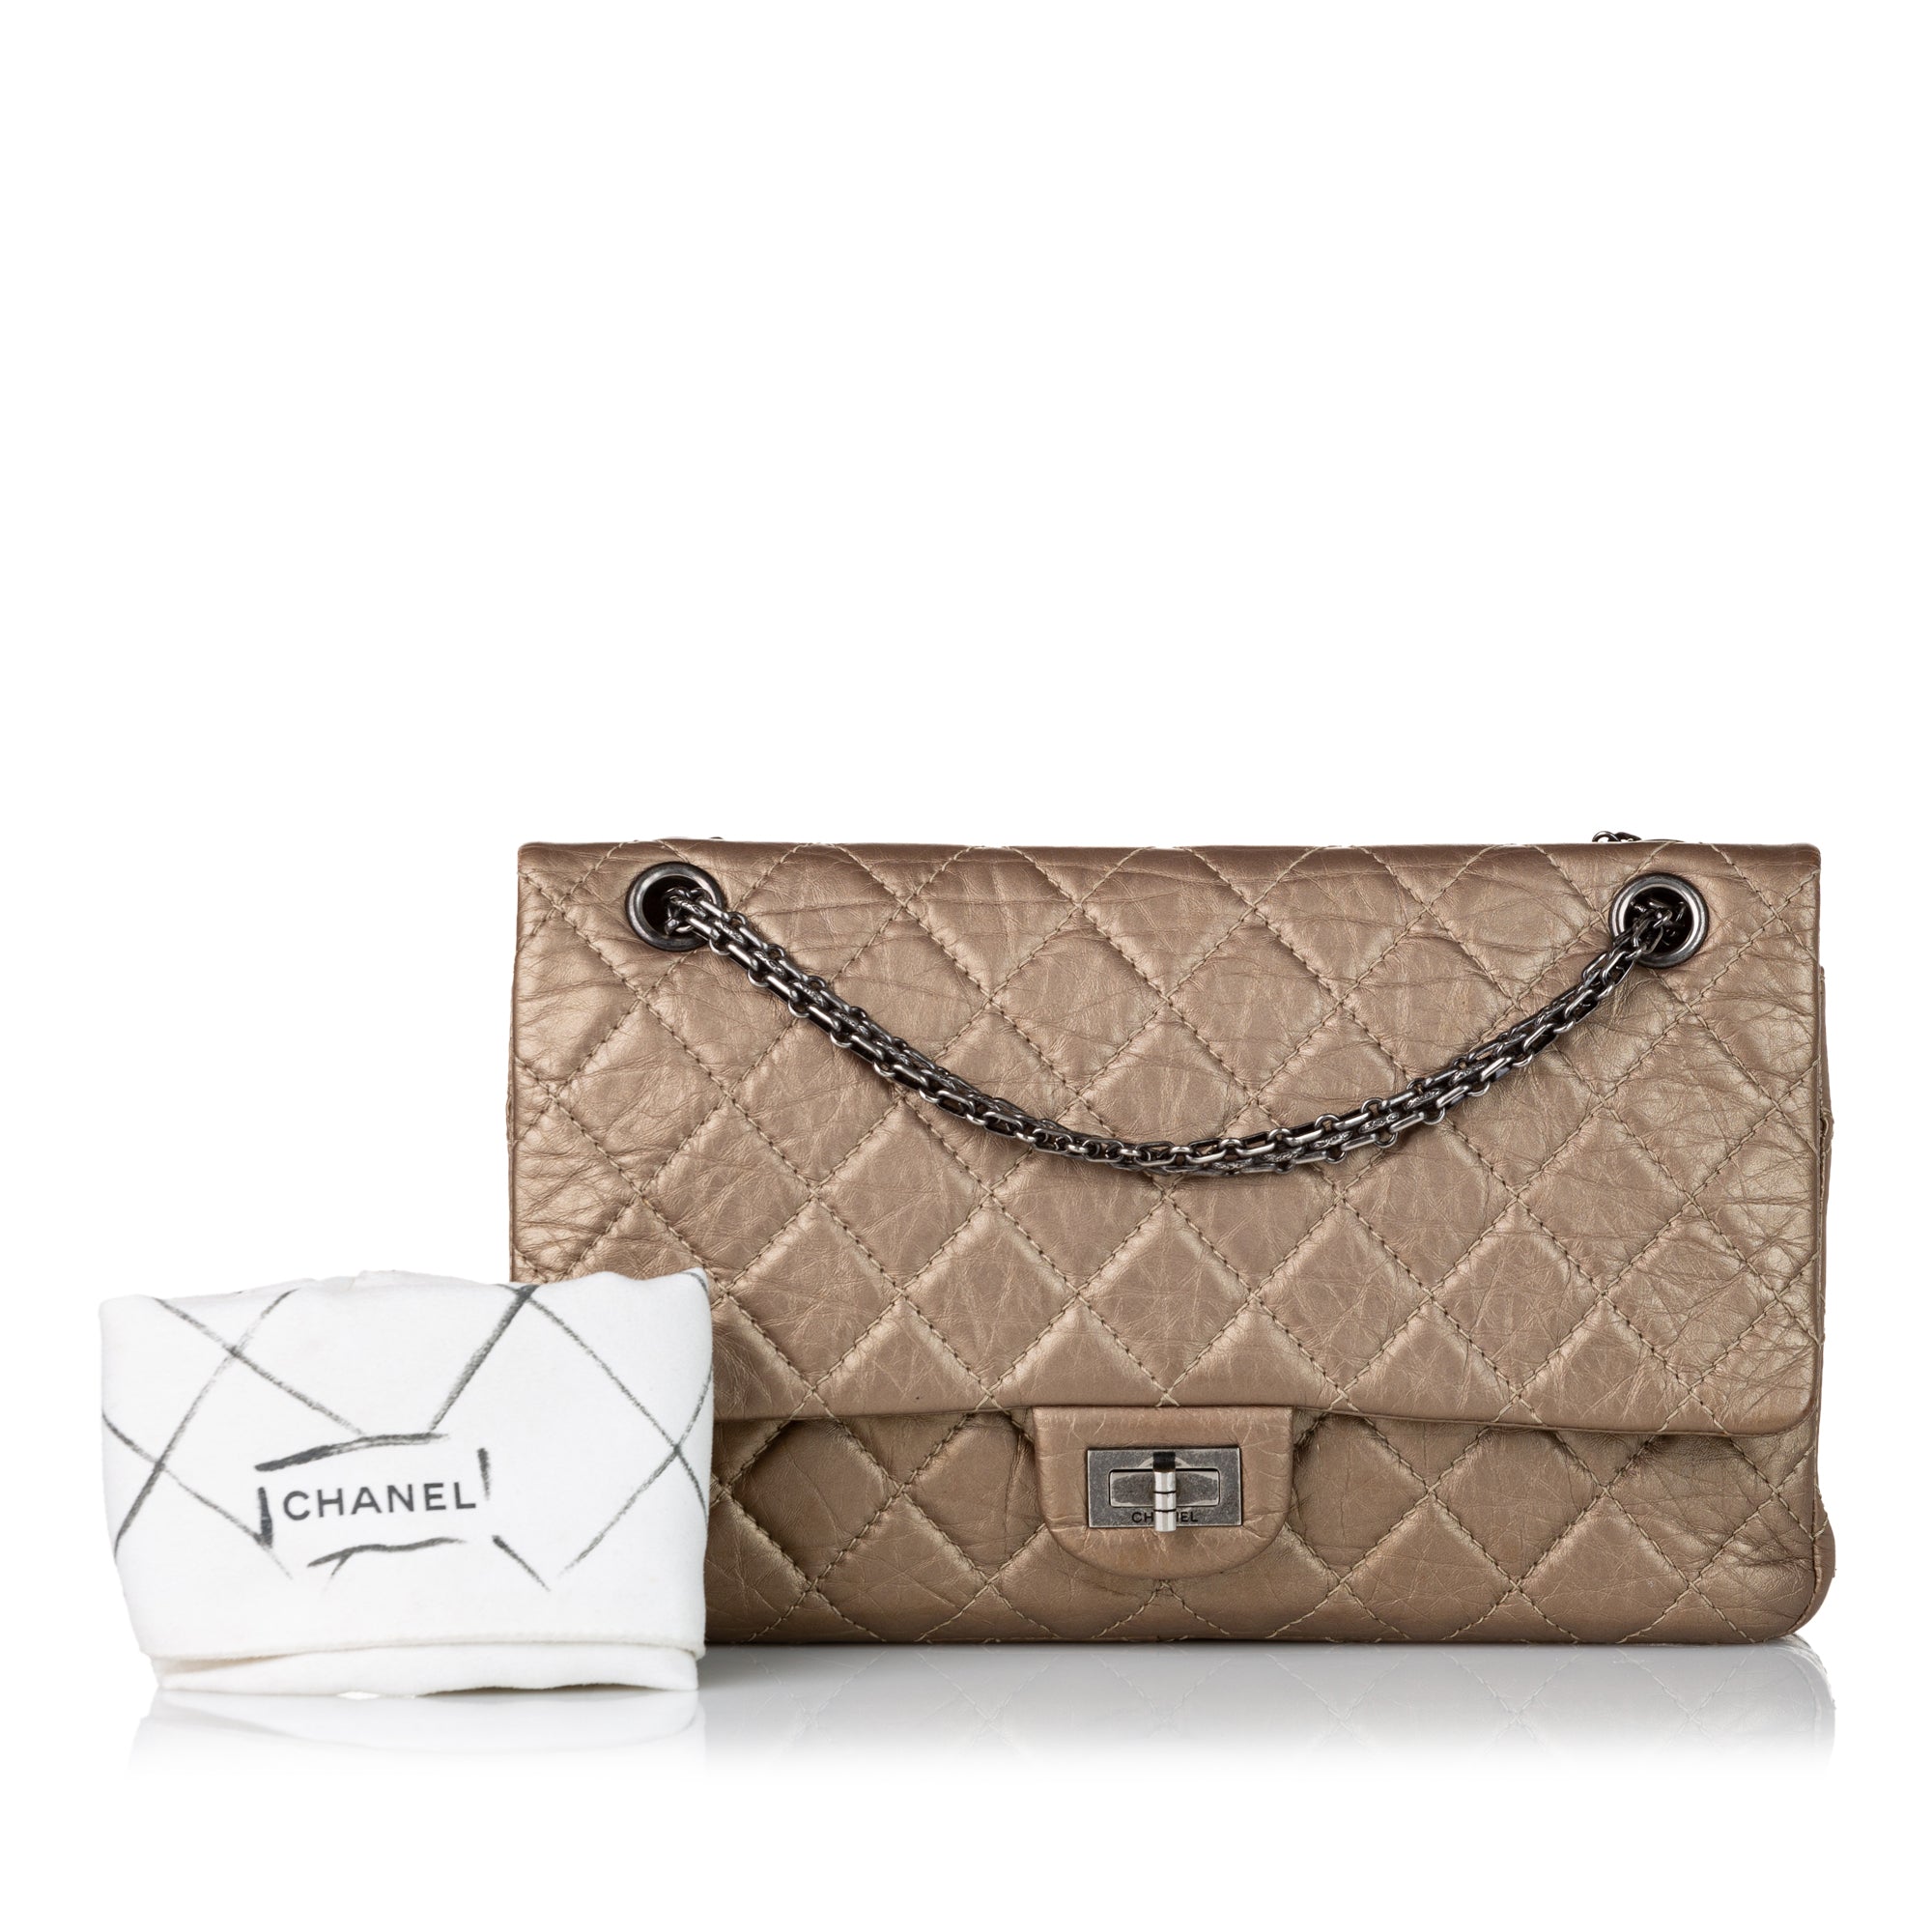 Chanel Classic flap bag and Chanel Reissue 2.55 bag